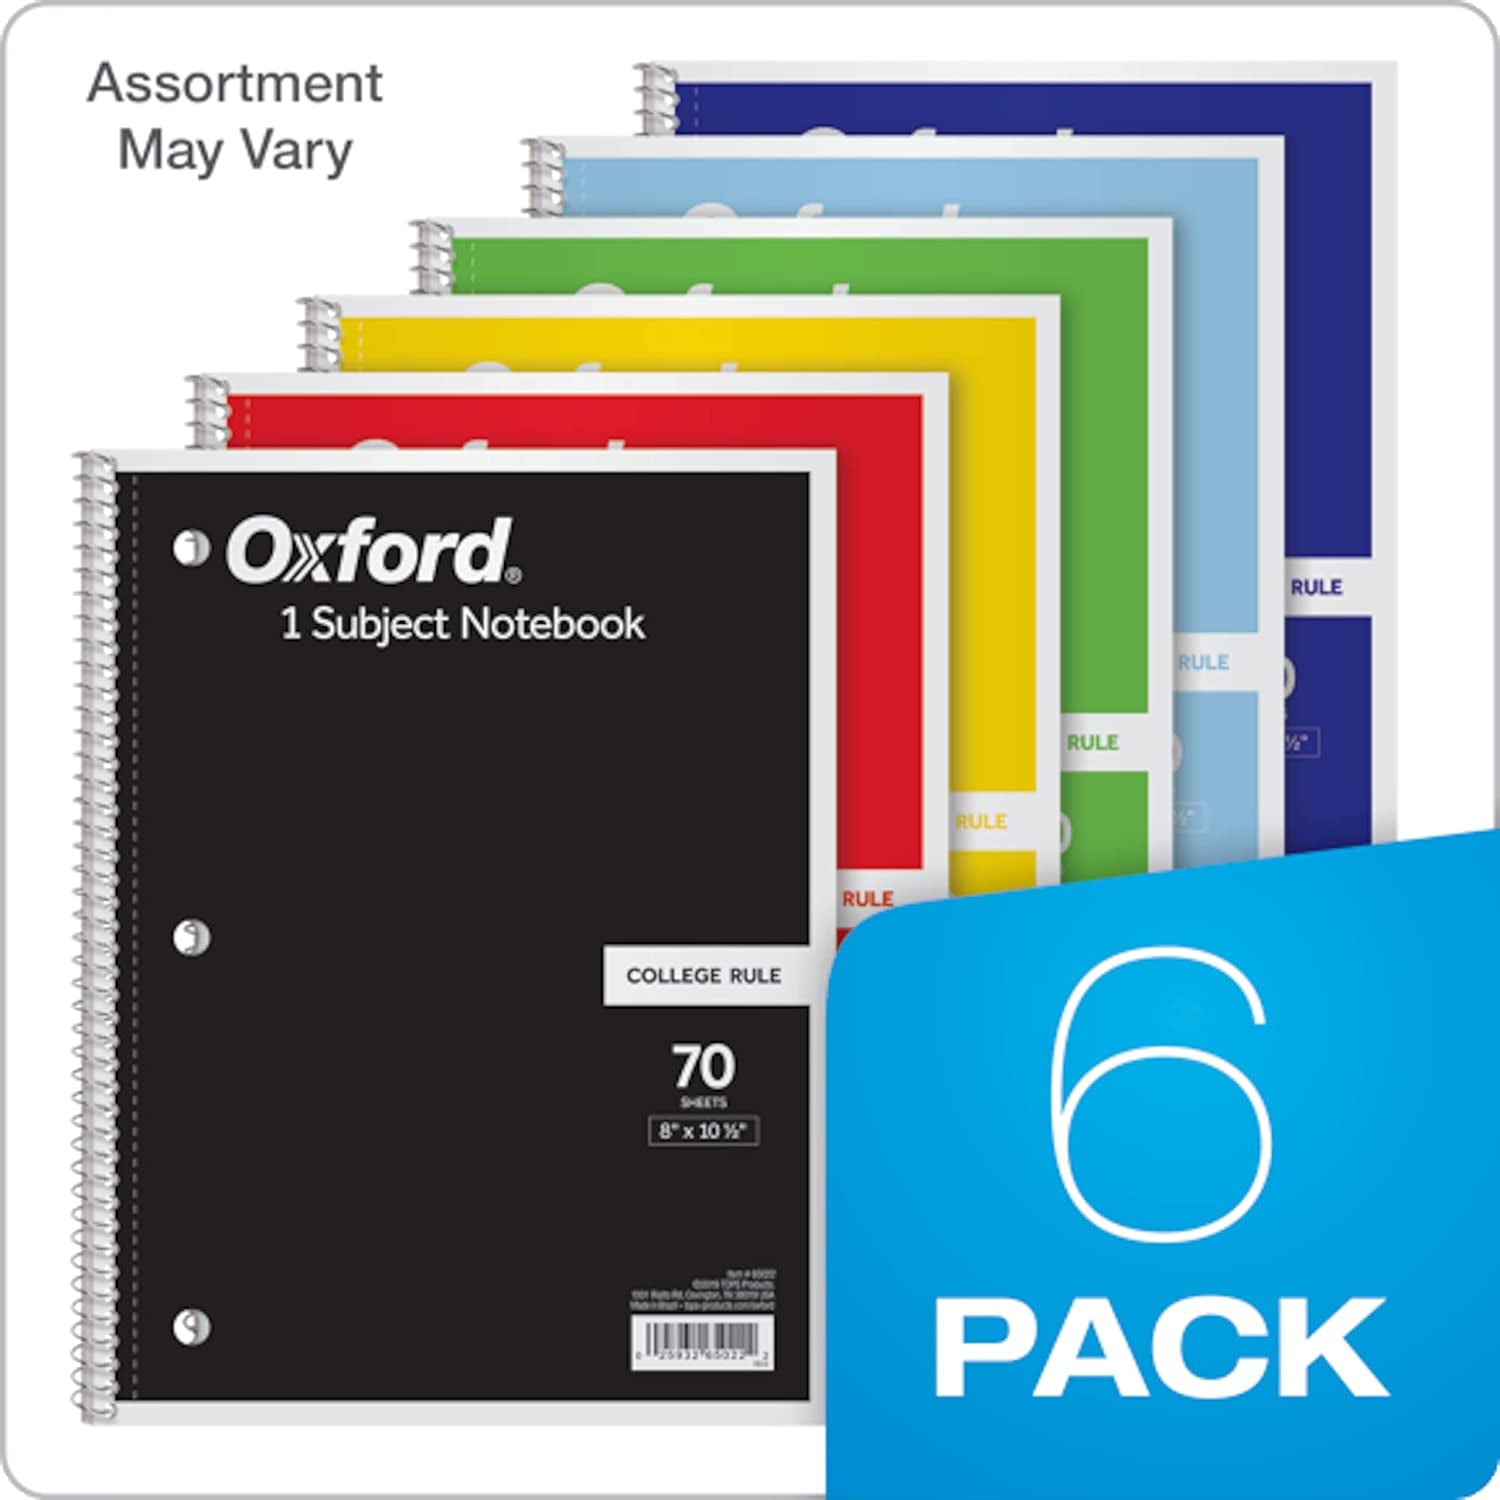 Spiral Notebook 6 Pack, 1 Subject, College Ruled Paper, 8 X 10-1/2 Inch, Color Assortment Design May Vary (65007)